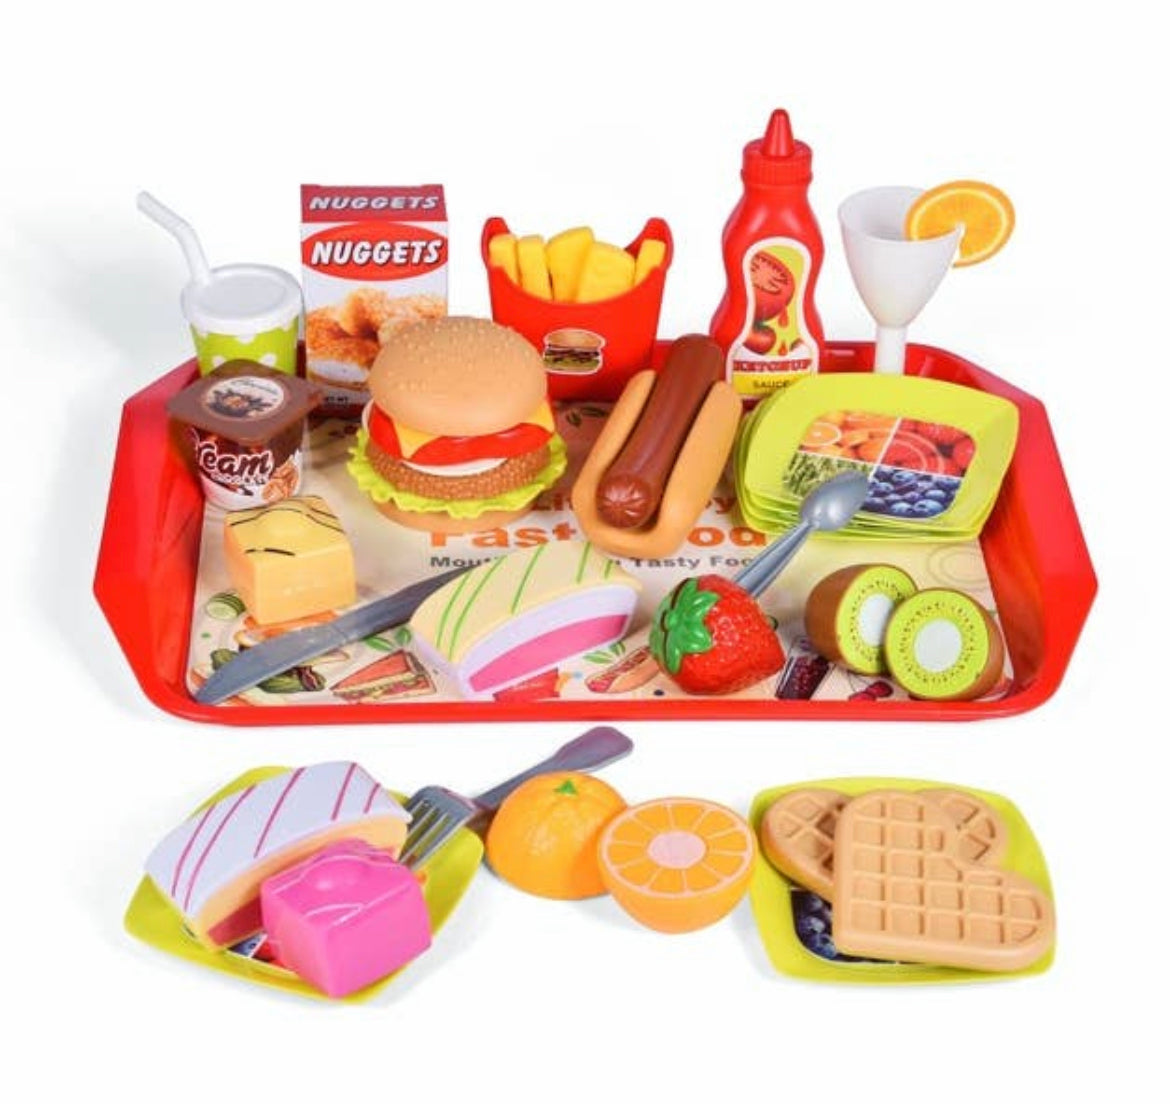 Pretend Play Food - Cutting Fruits Cake Fast Food